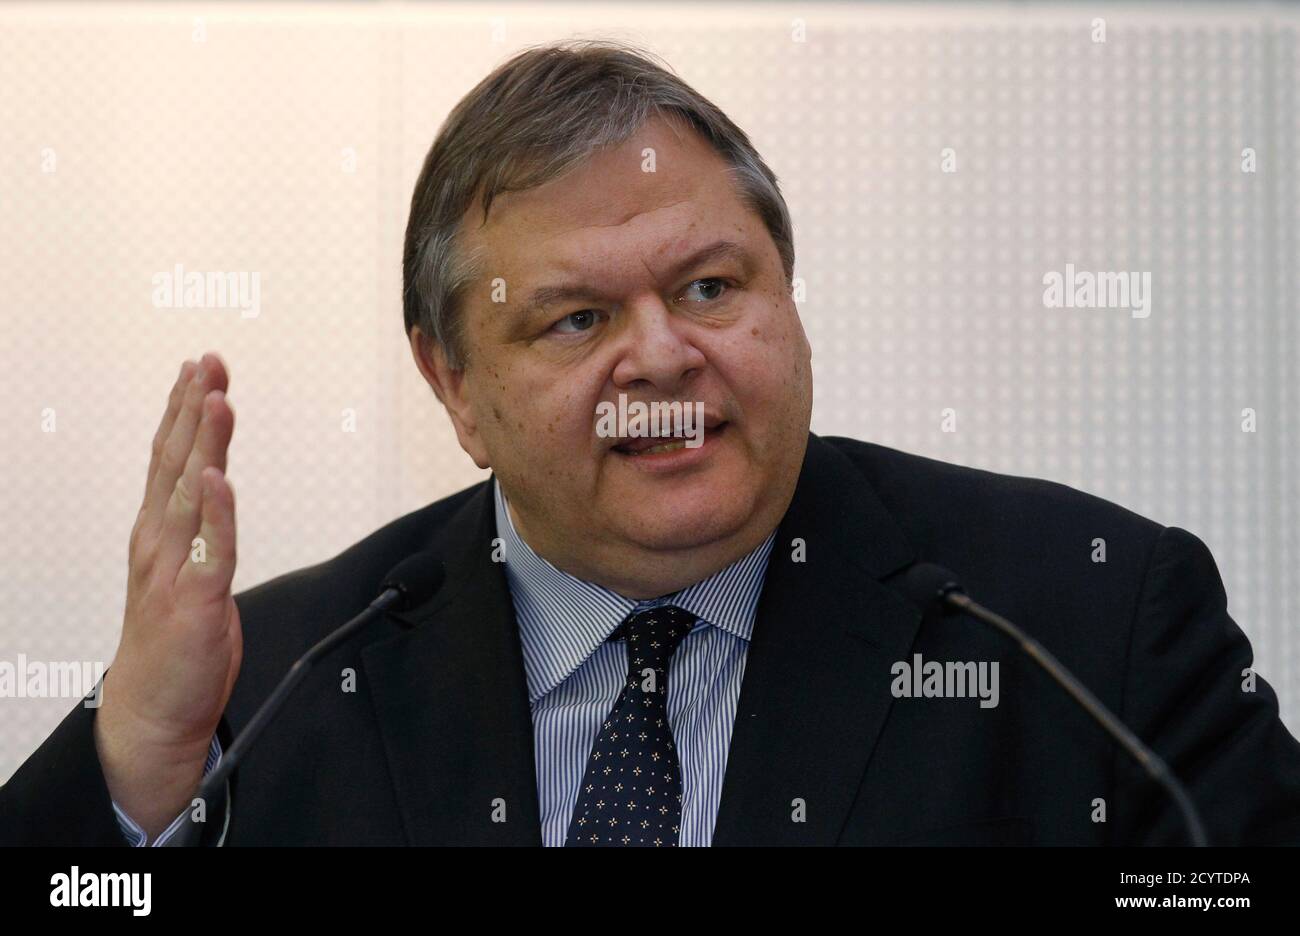 Greece's Finance Minister Evangelos Venizelos addresses the audience during a conference in Athens December 20, 2011. Talks between authorities and banks over a deal to restructure private sector holdings of Greek bonds were getting nearer to a deal, Venizelos said on Tuesday.  REUTERS/Yiorgos Karahalis (GREECE - Tags: BUSINESS POLITICS) Stock Photo